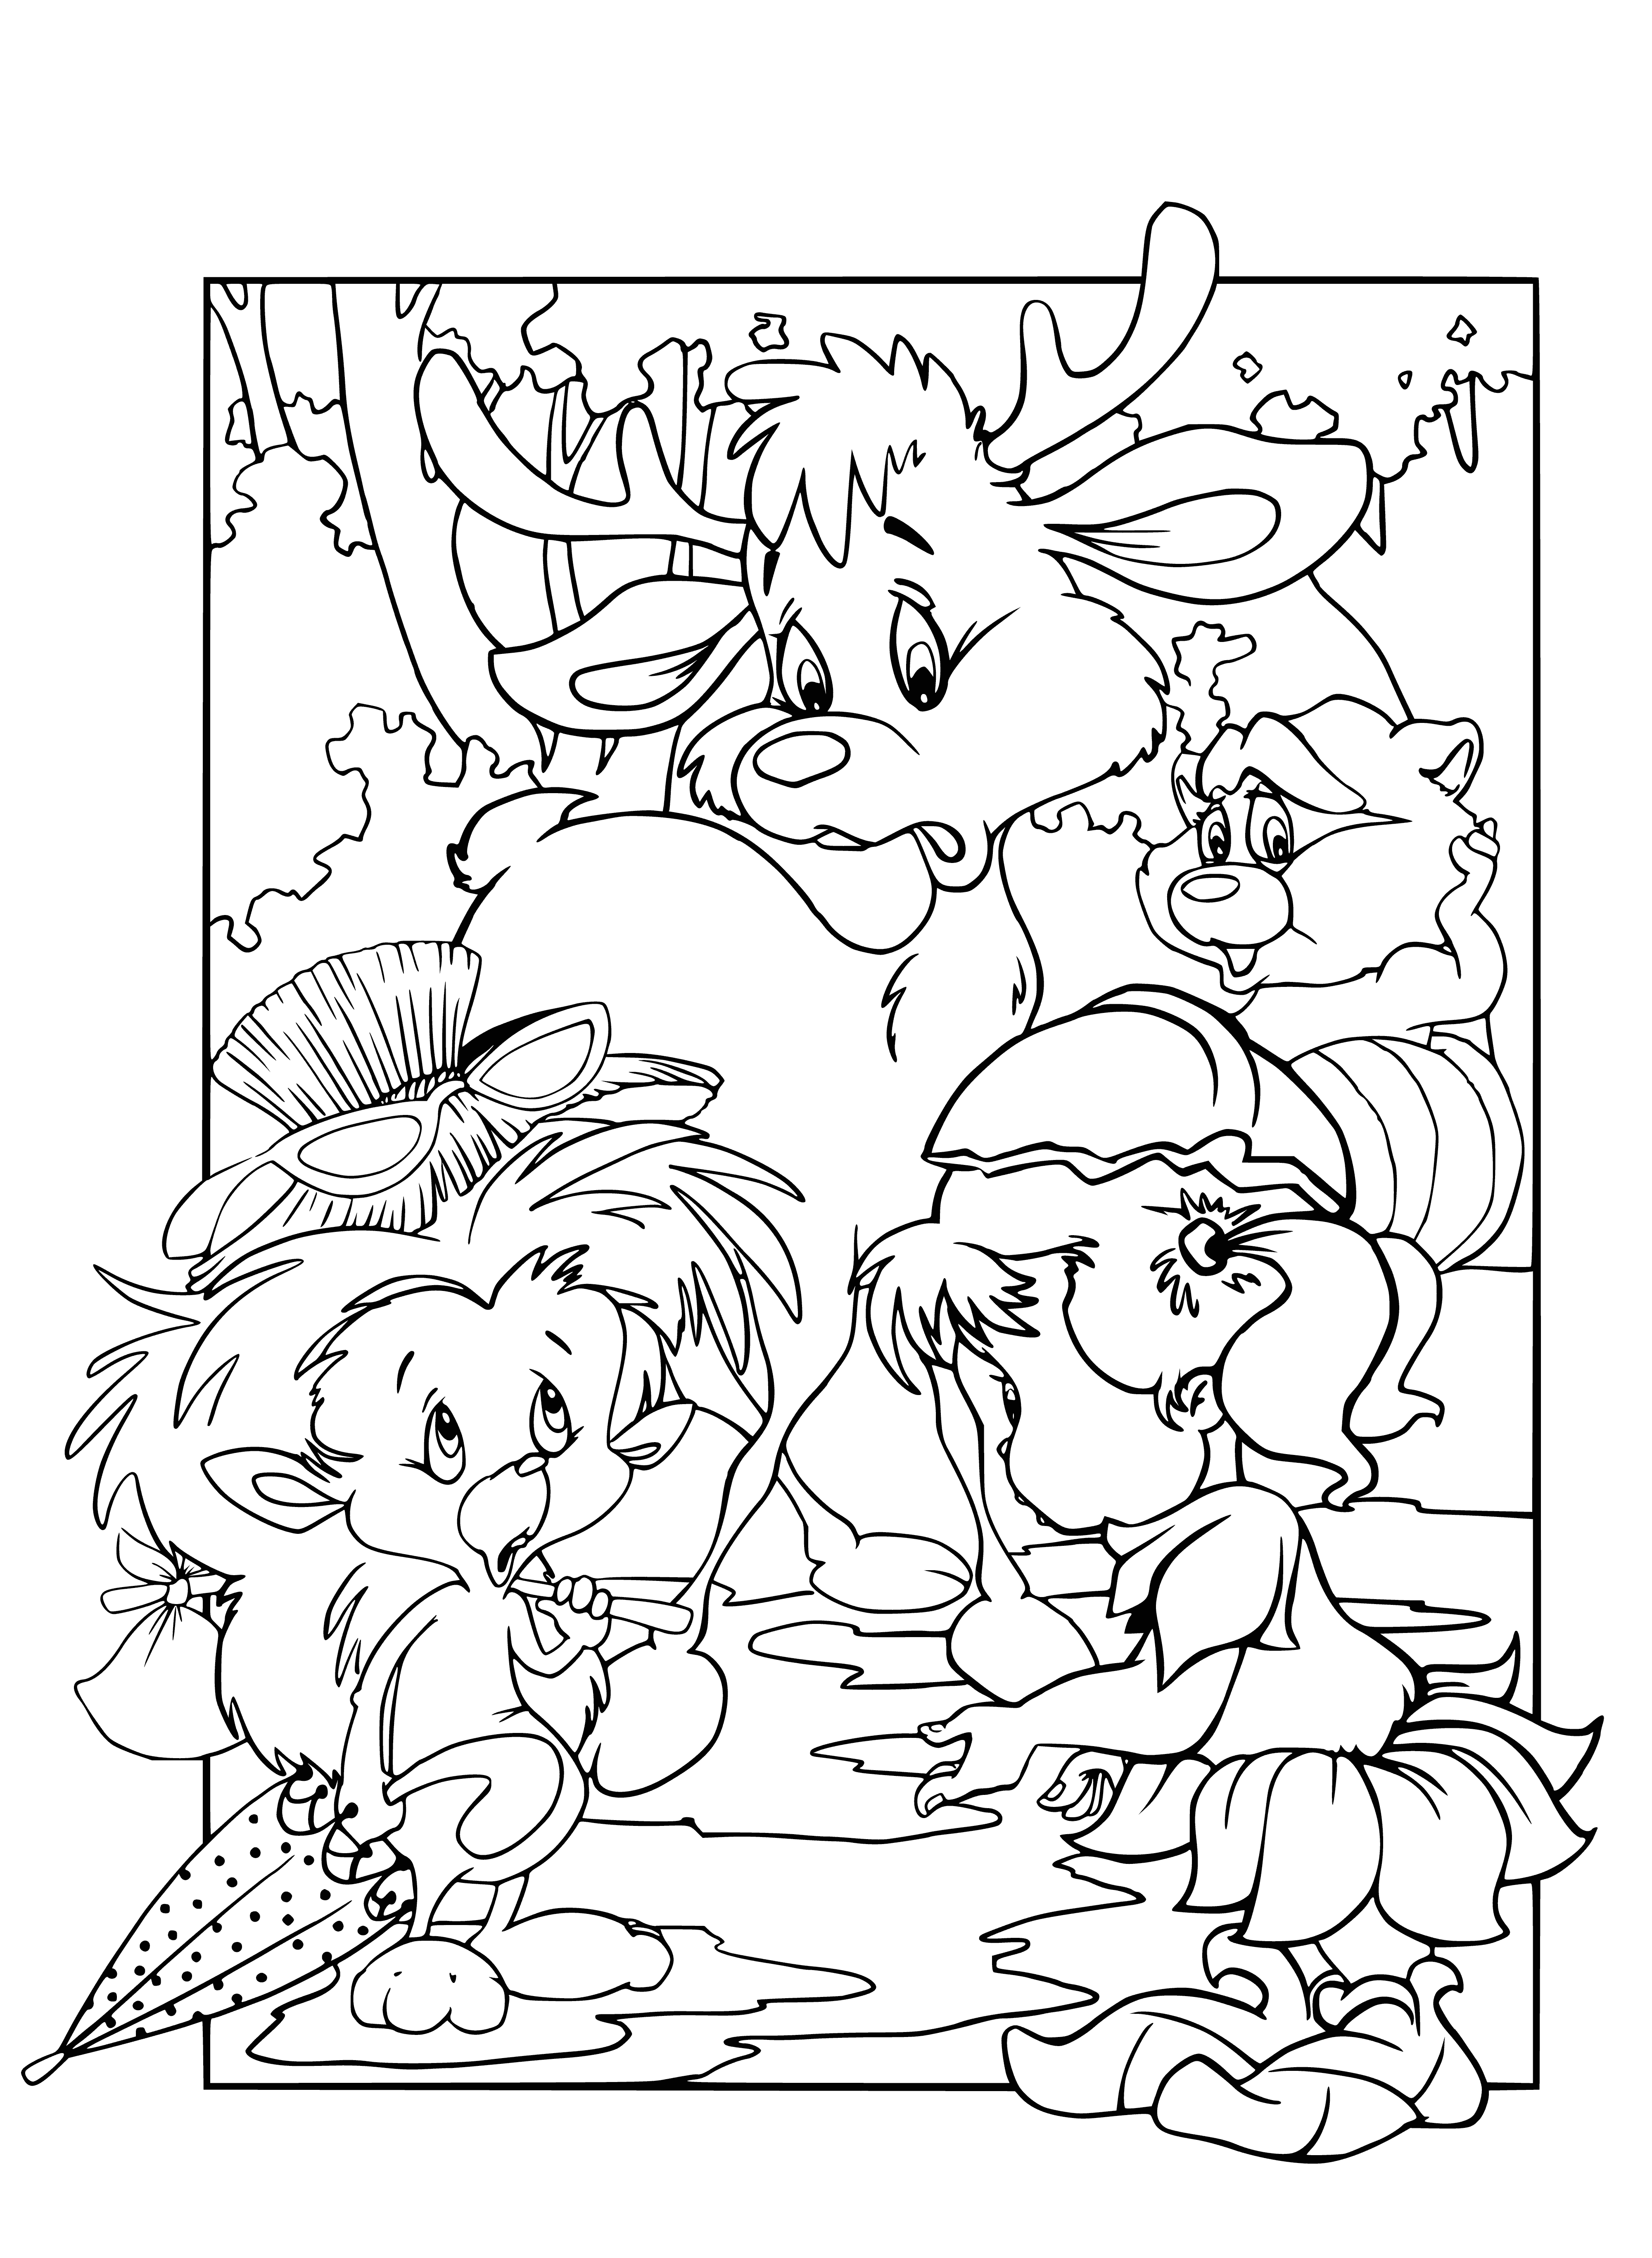 Hedgehog with an umbrella coloring page